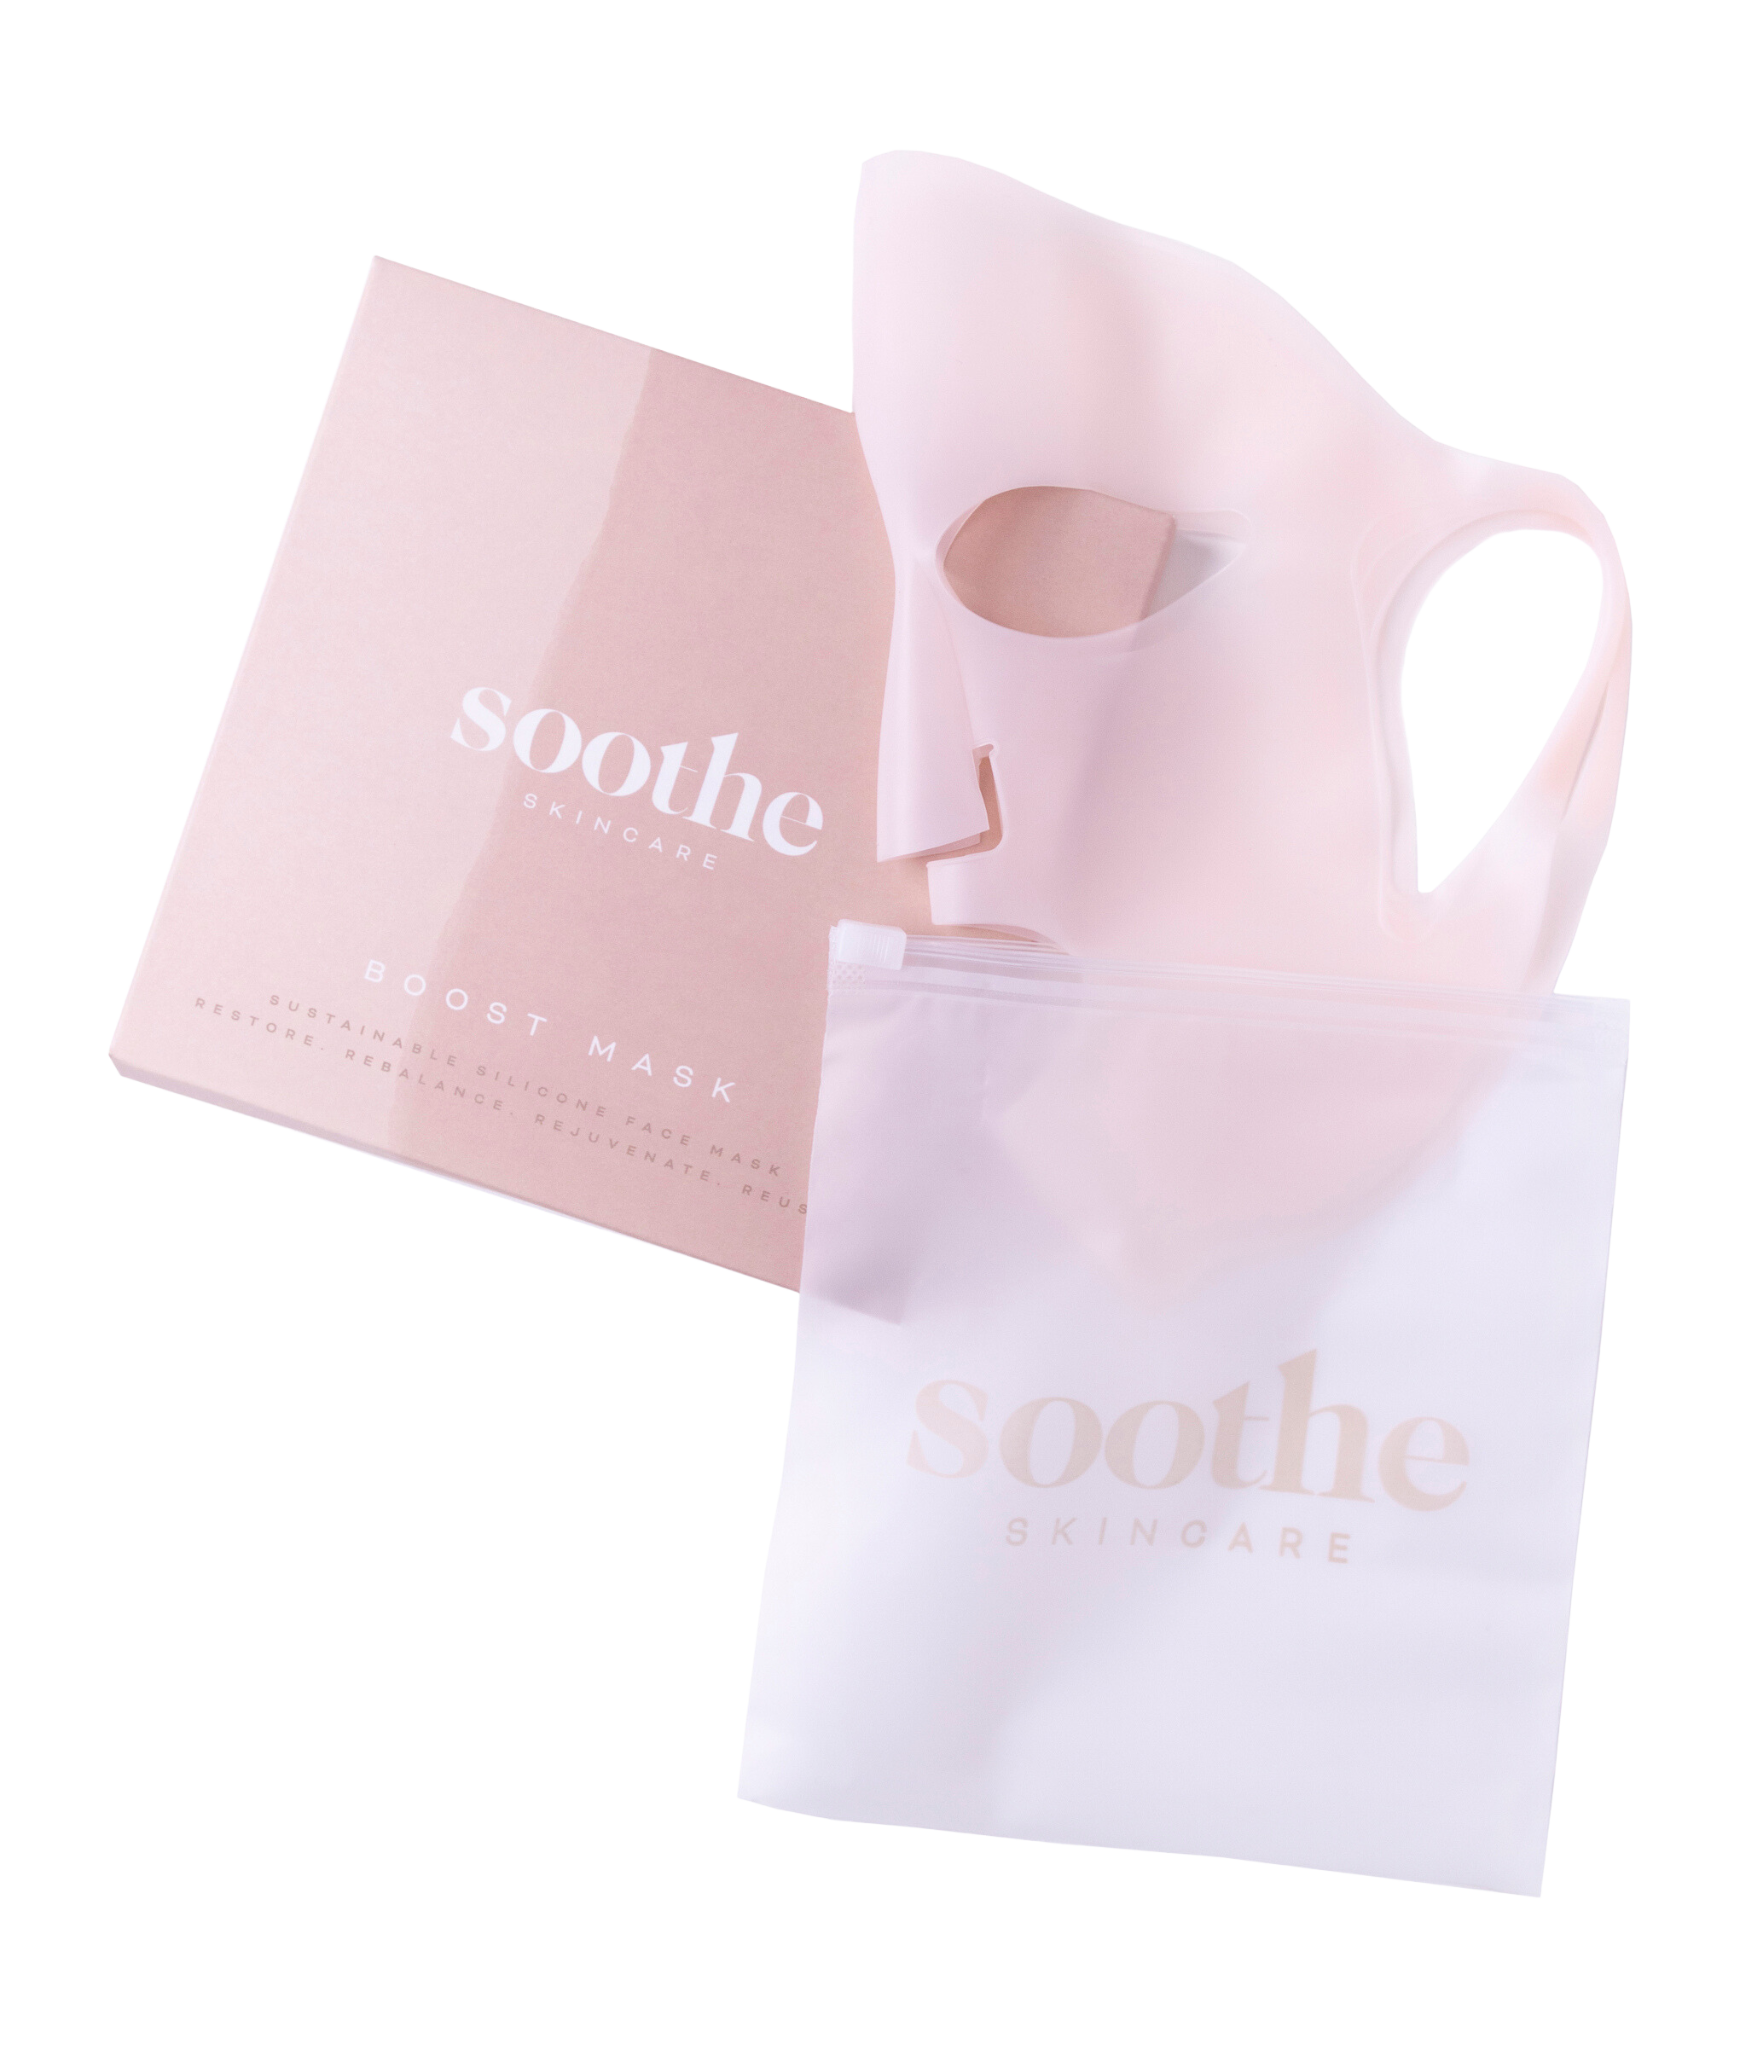 Reusable Silicone Boost Mask by Soothe Skincare €14.99  